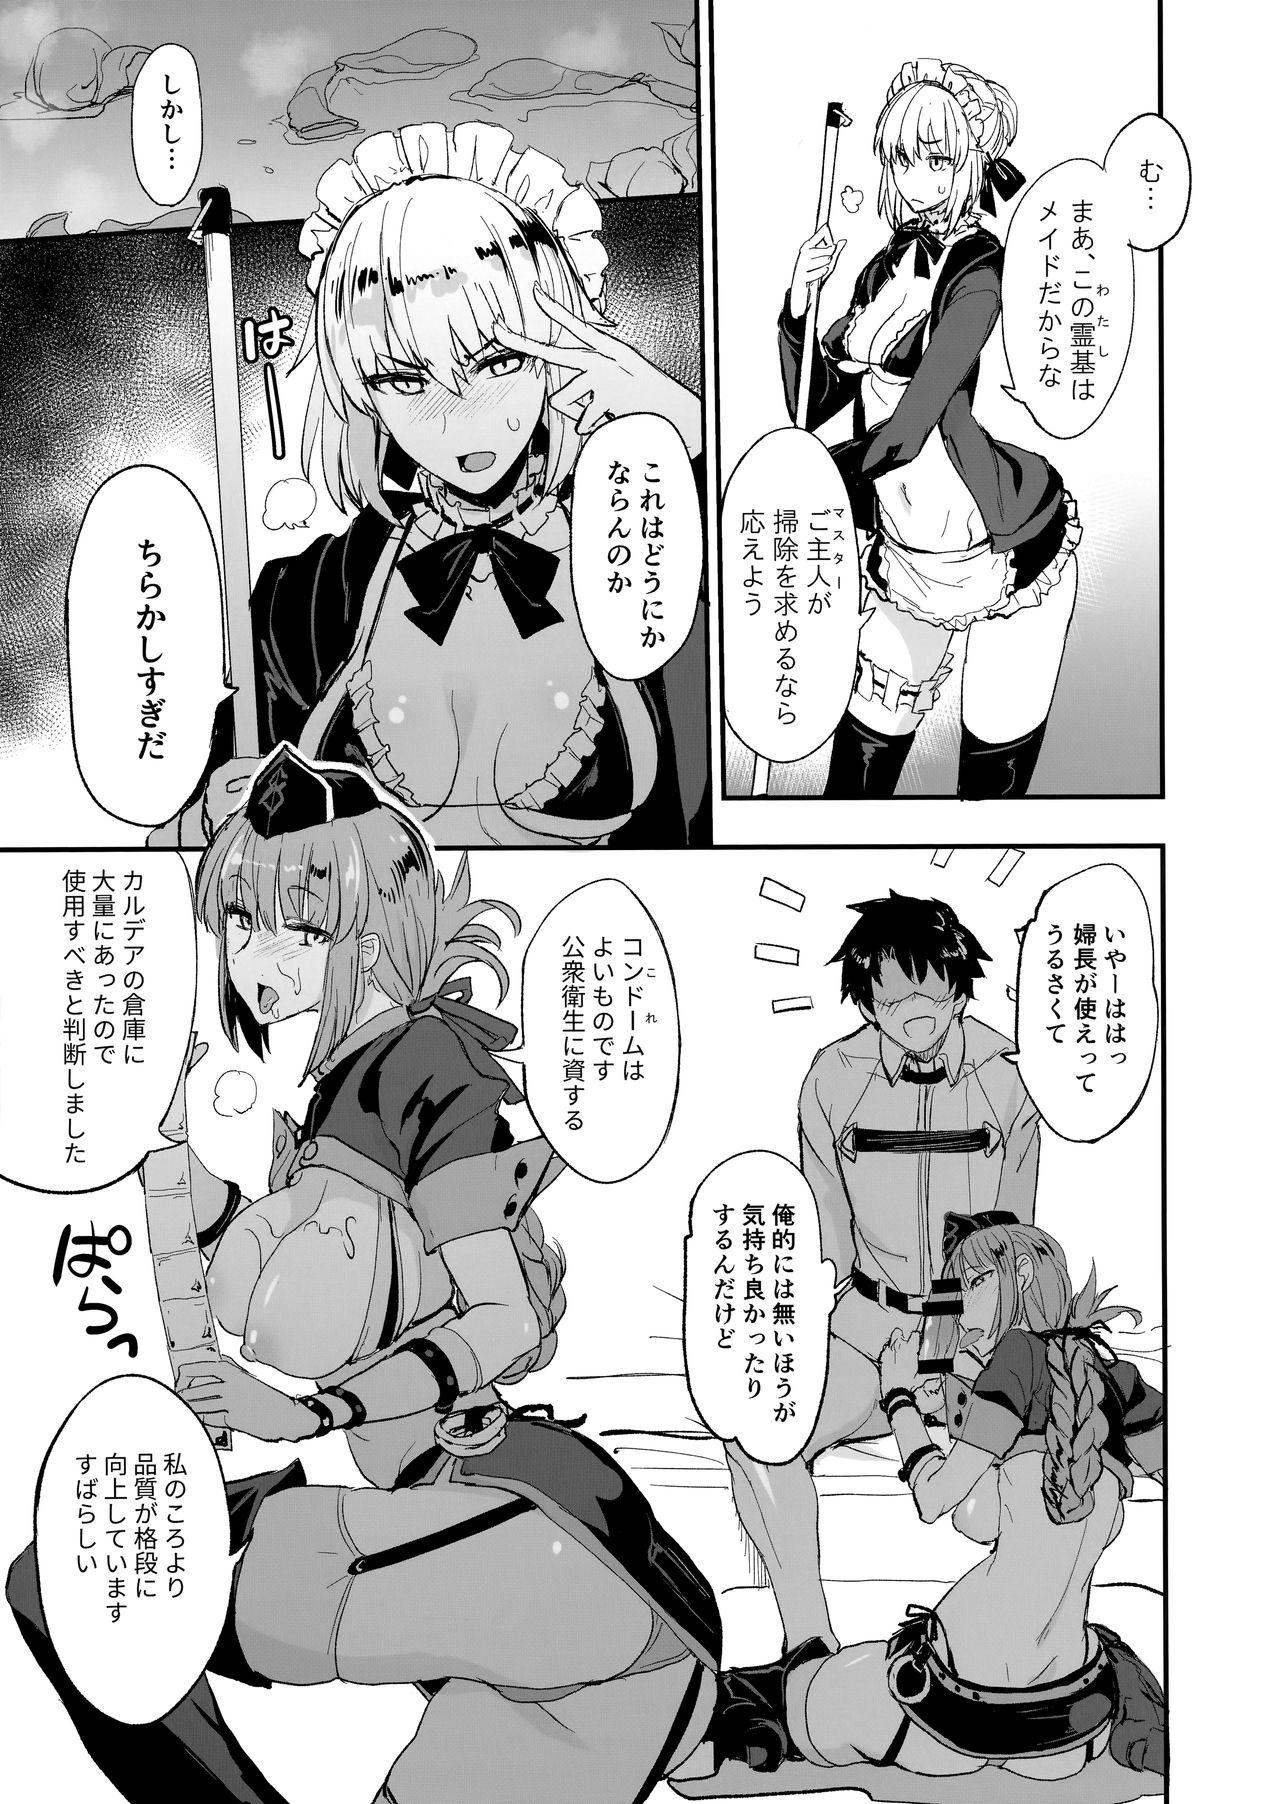 Hot Girls Getting Fucked FGO no Erohon 2 - Fate grand order Bang - Page 6